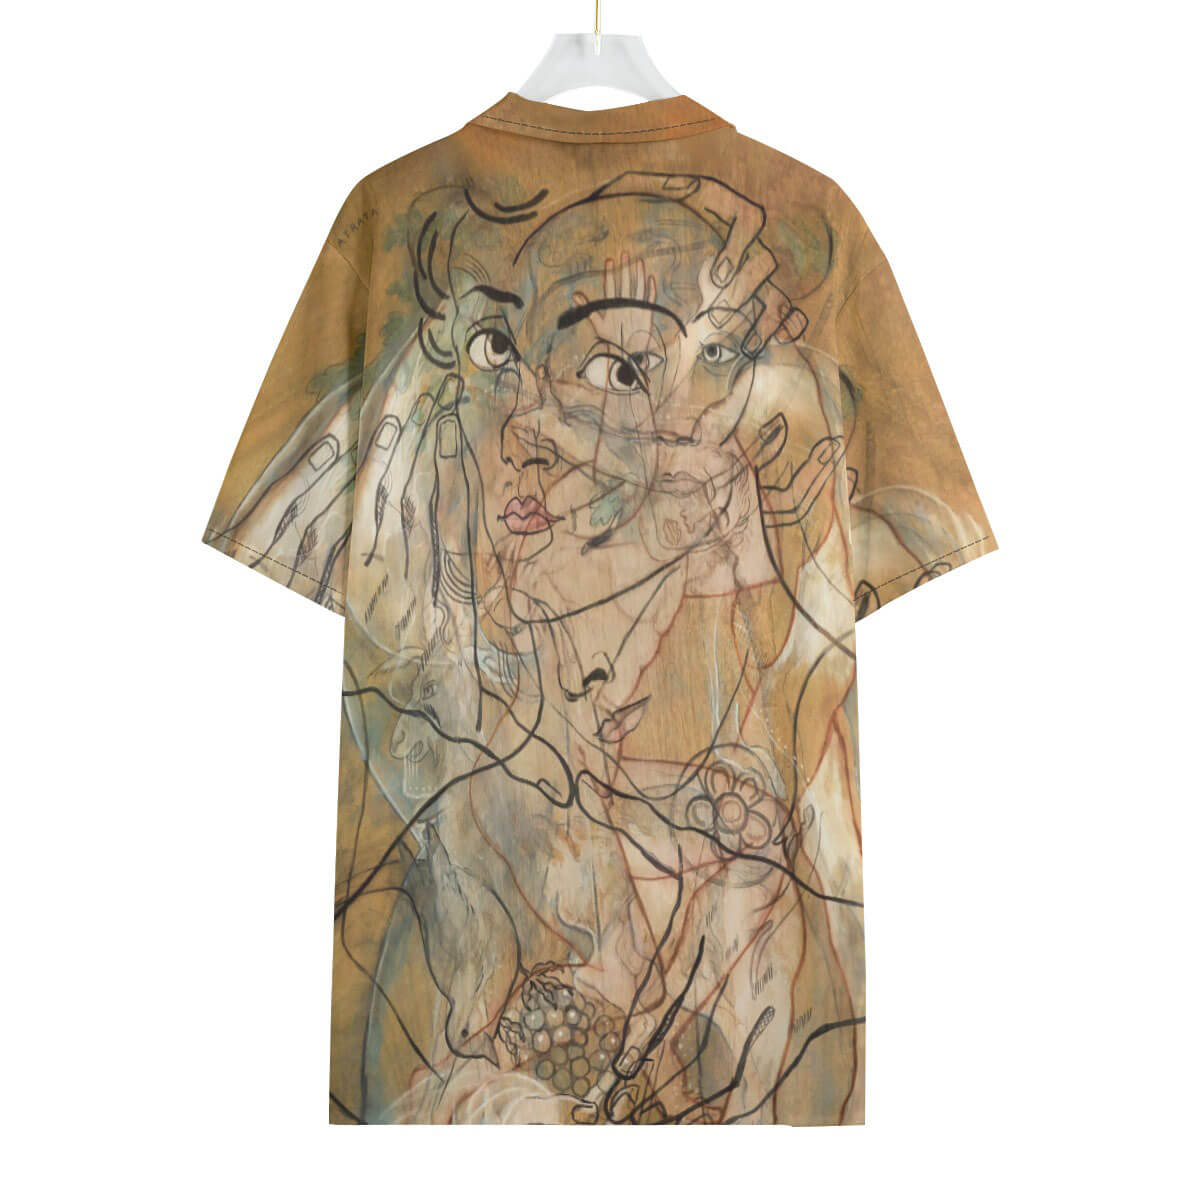 Picabia's Atrata shirt paired with casual wear